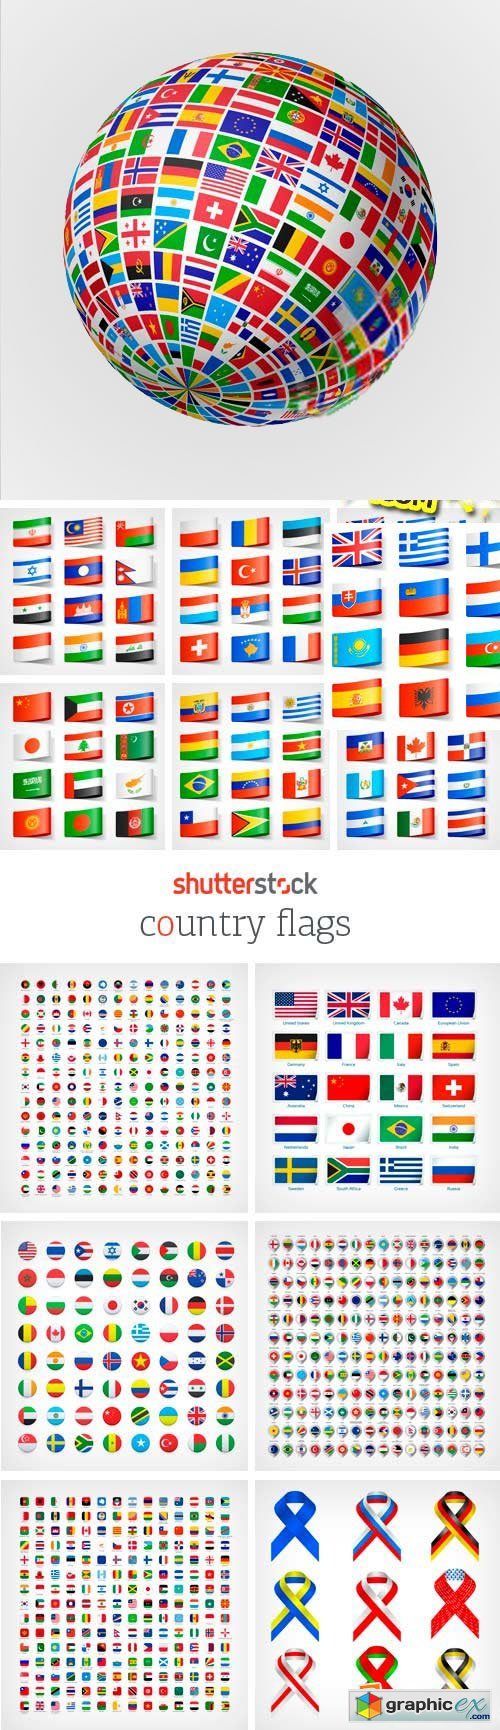 Amazing SS - Country Flags, 25xEPS